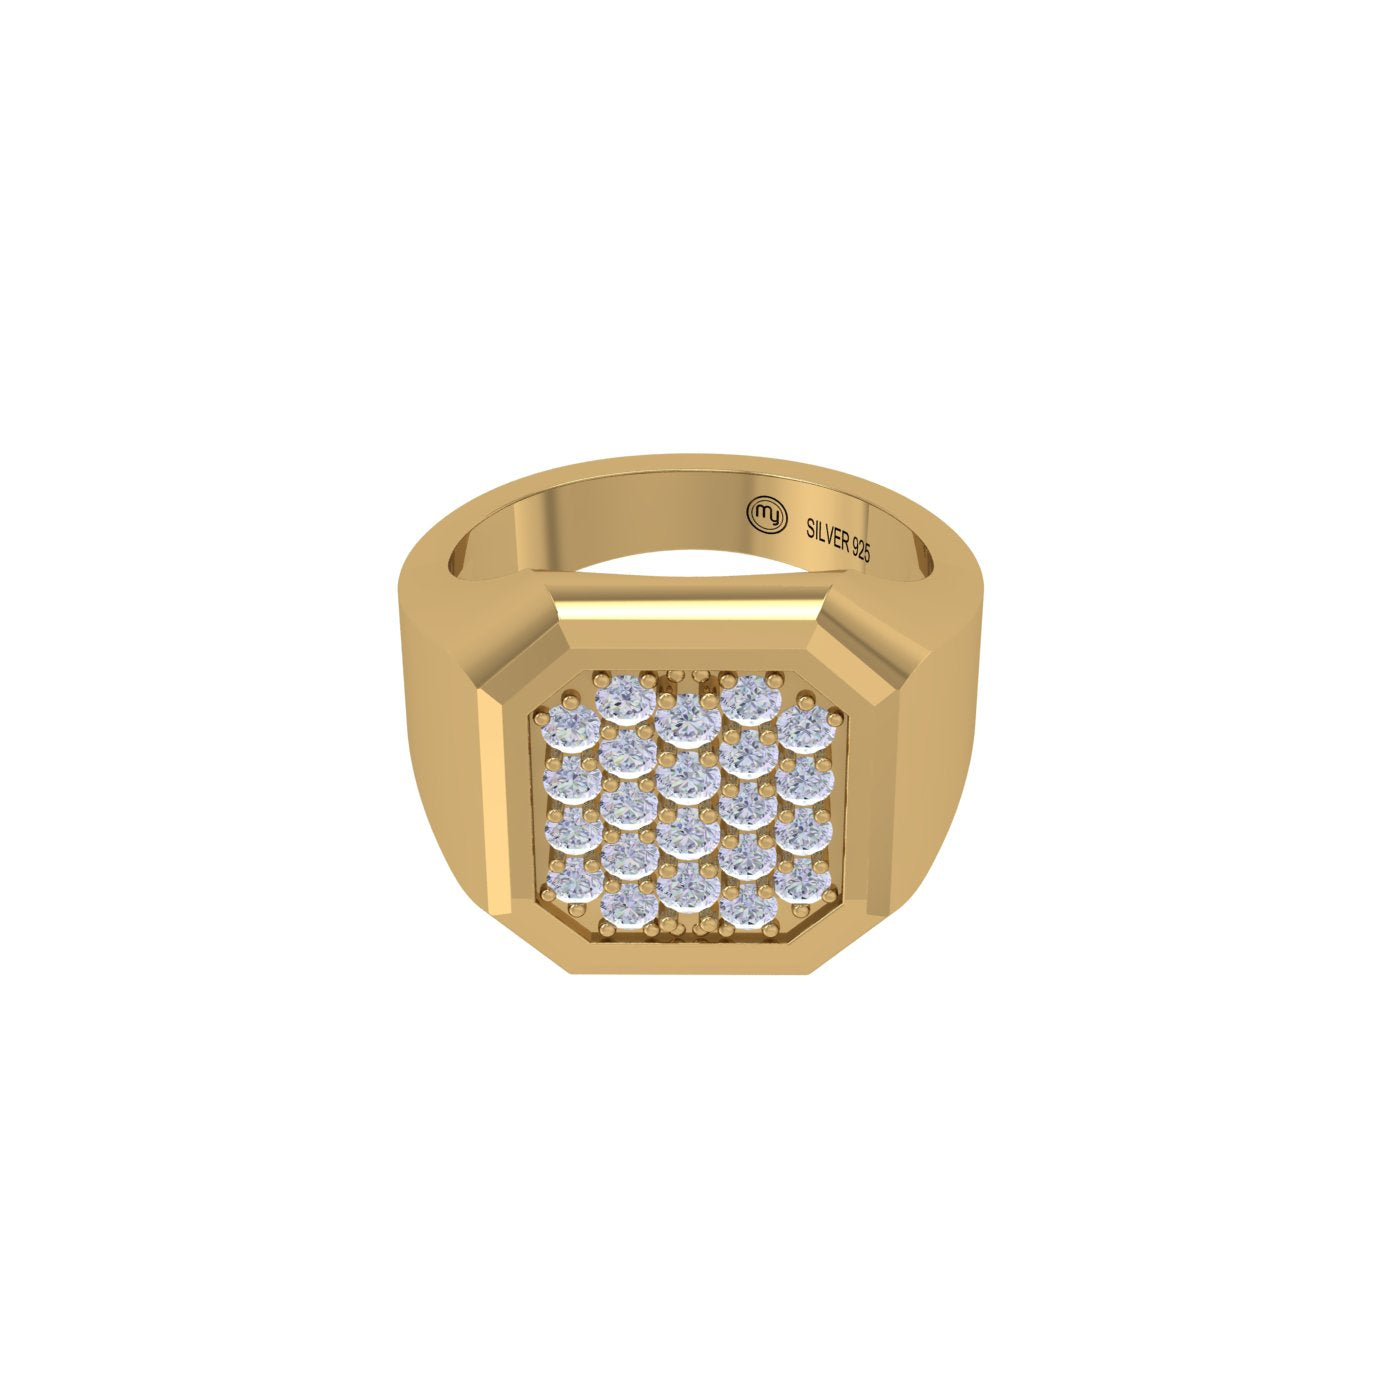 The Aagney Men's Ring